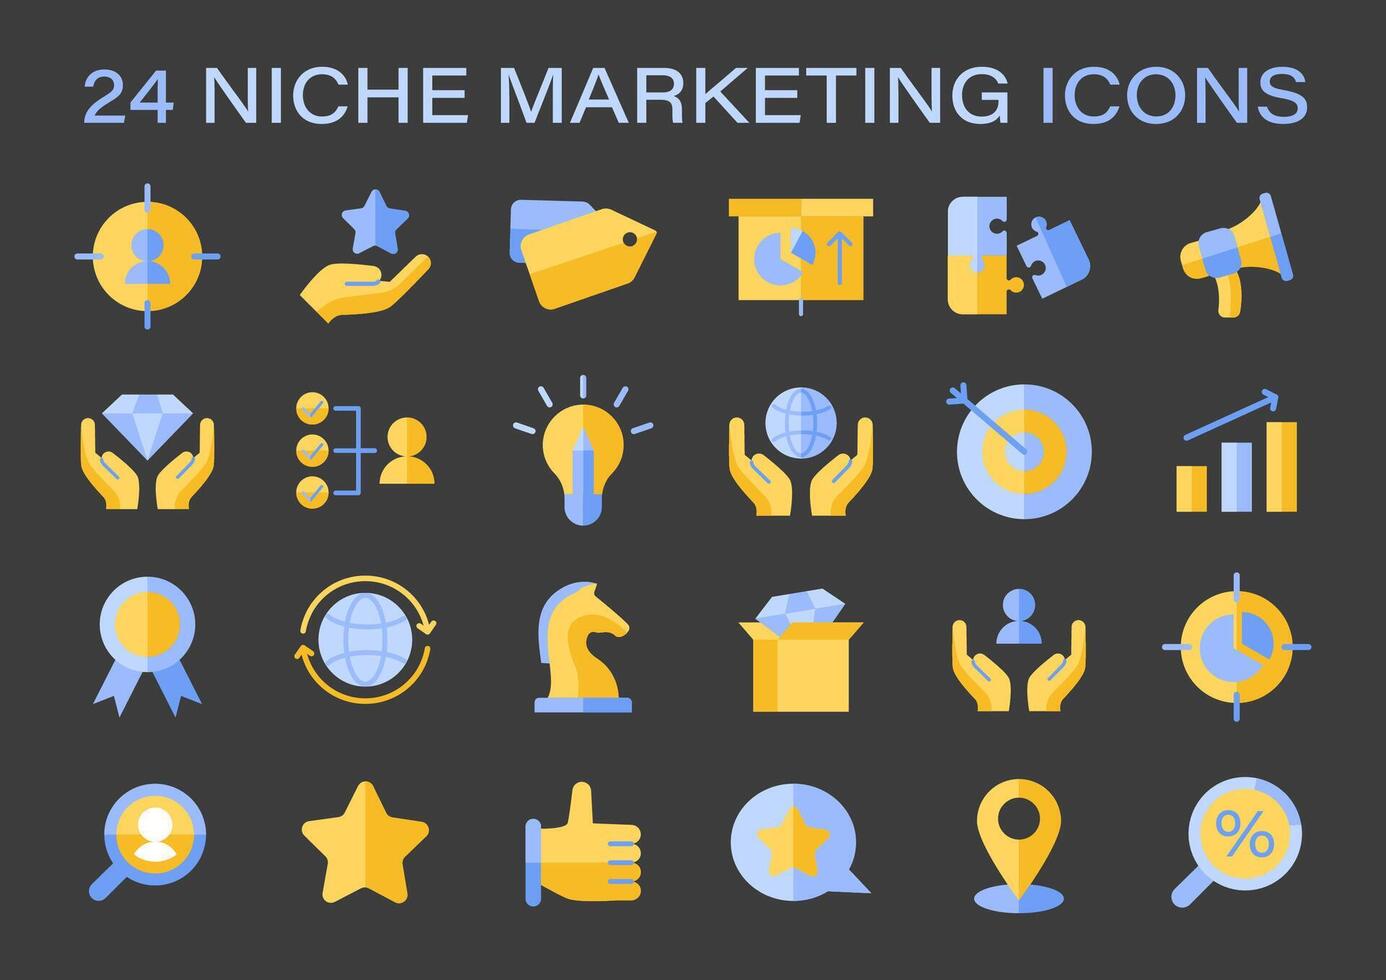 Niche Marketing set. Tailored strategy symbols for targeted audience engagement. vector